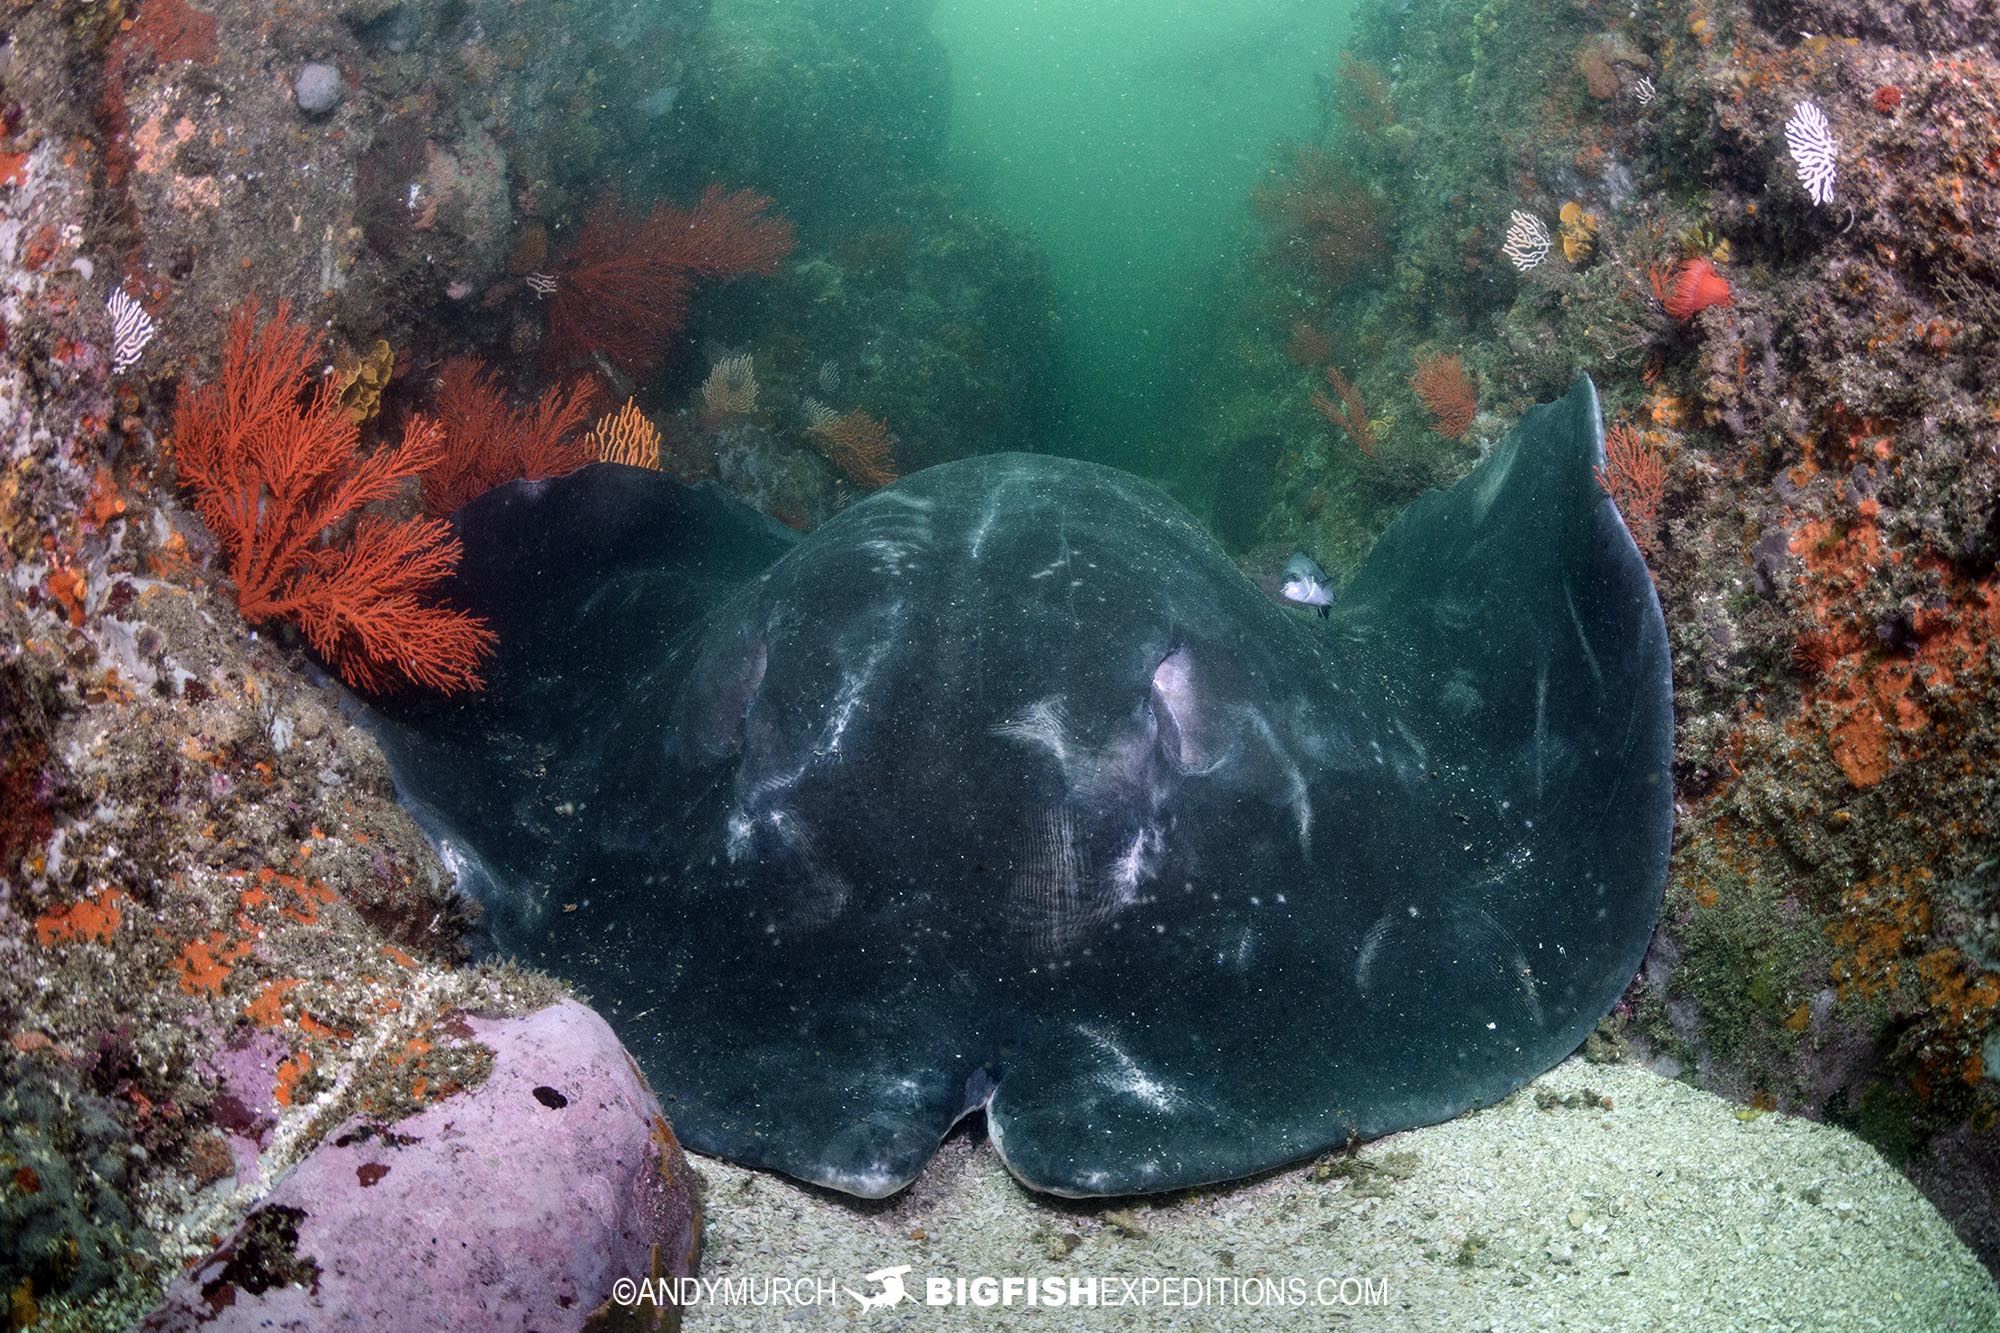 Diving with a massive shorttail stingray in South Africa.